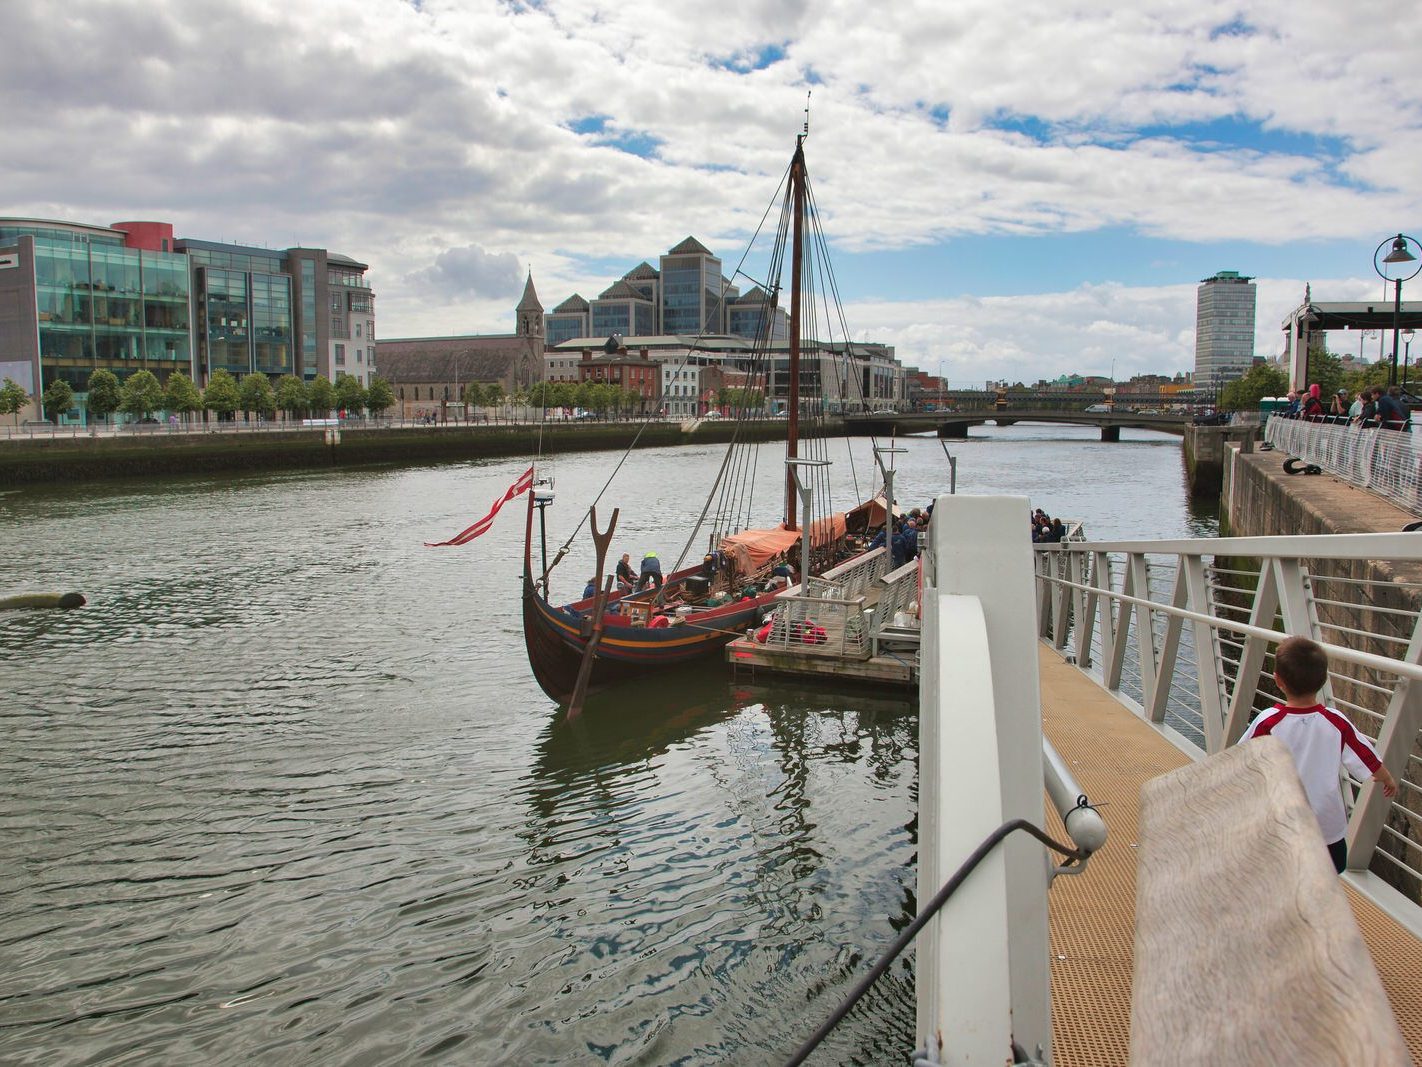 THE SEA STALLION FROM GLEANDALOUGH WAS LIFTED INTO THE LIFFEY USING A LARGE CRANE 015